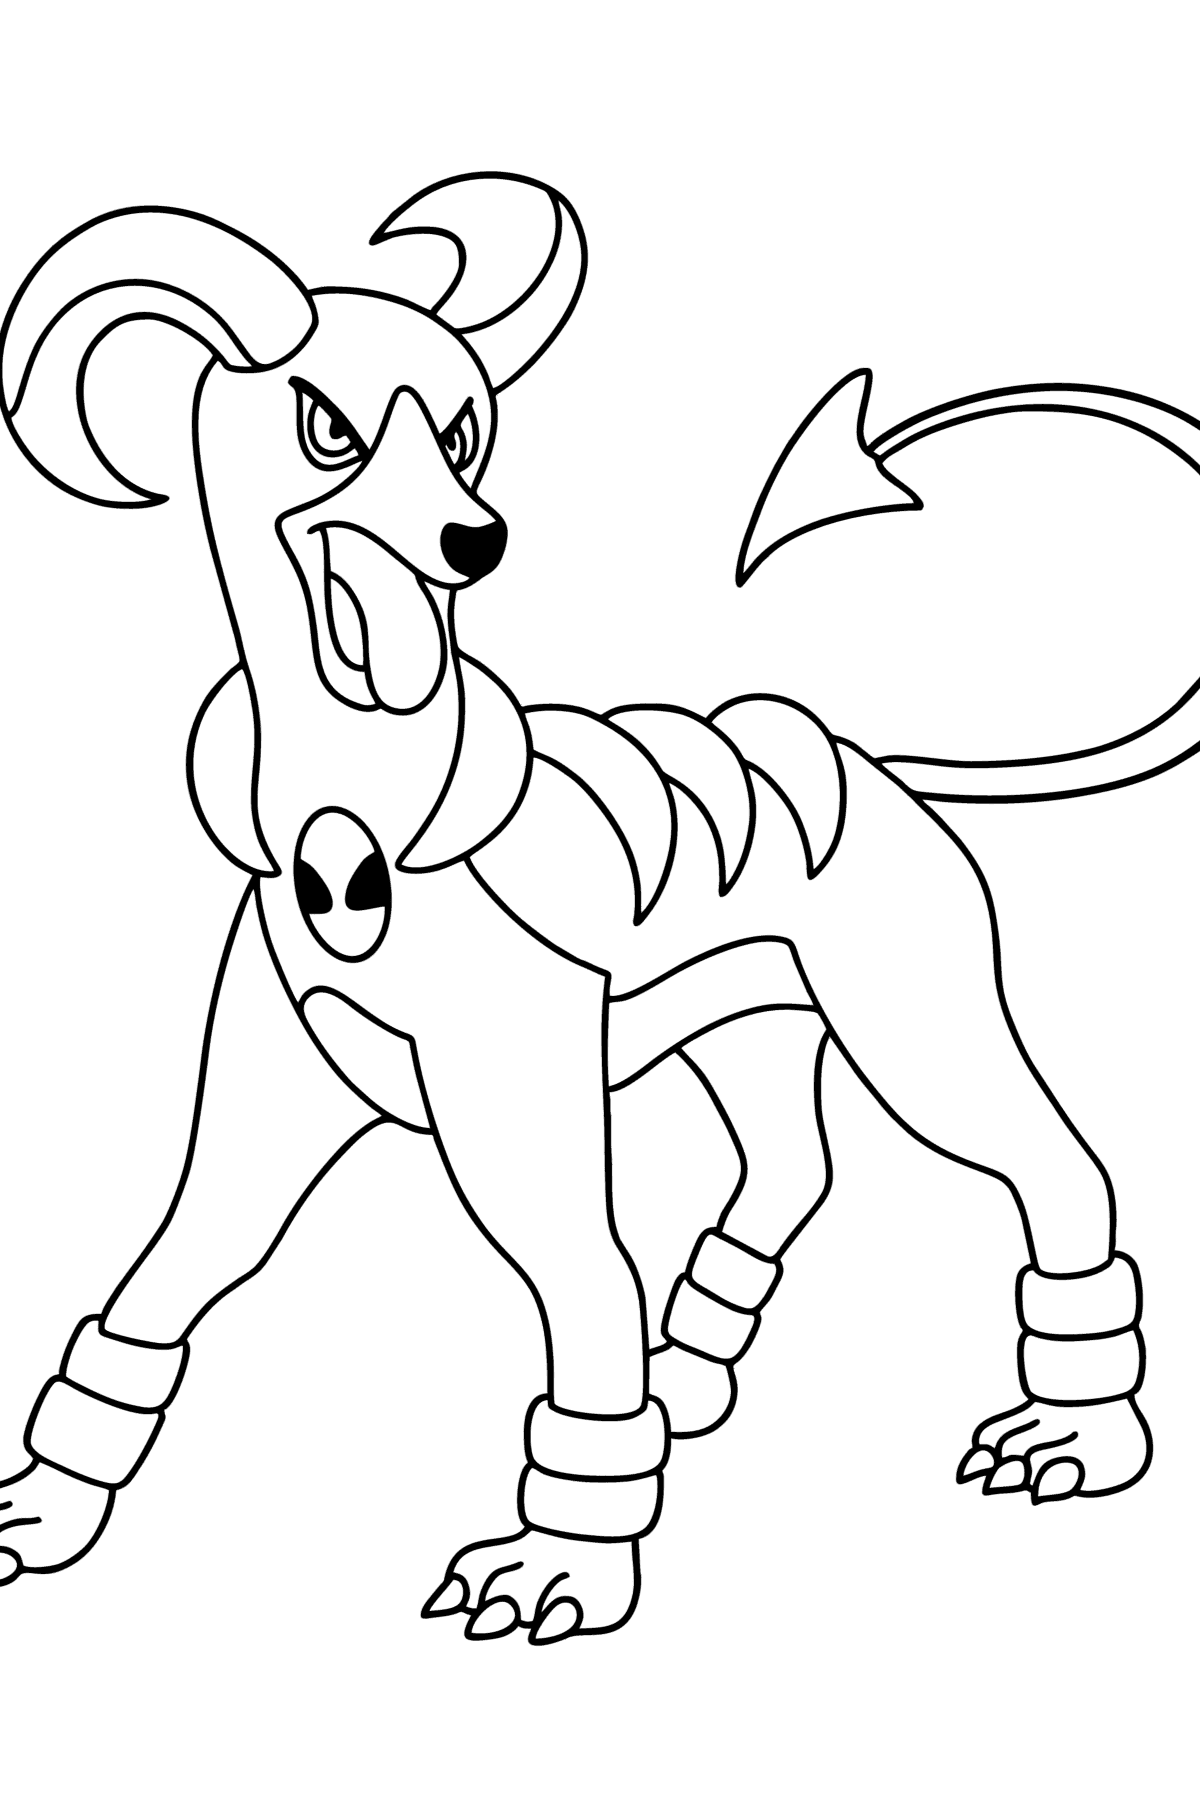 Colouring page Pokémon X and Y Houndoom - Coloring Pages for Kids